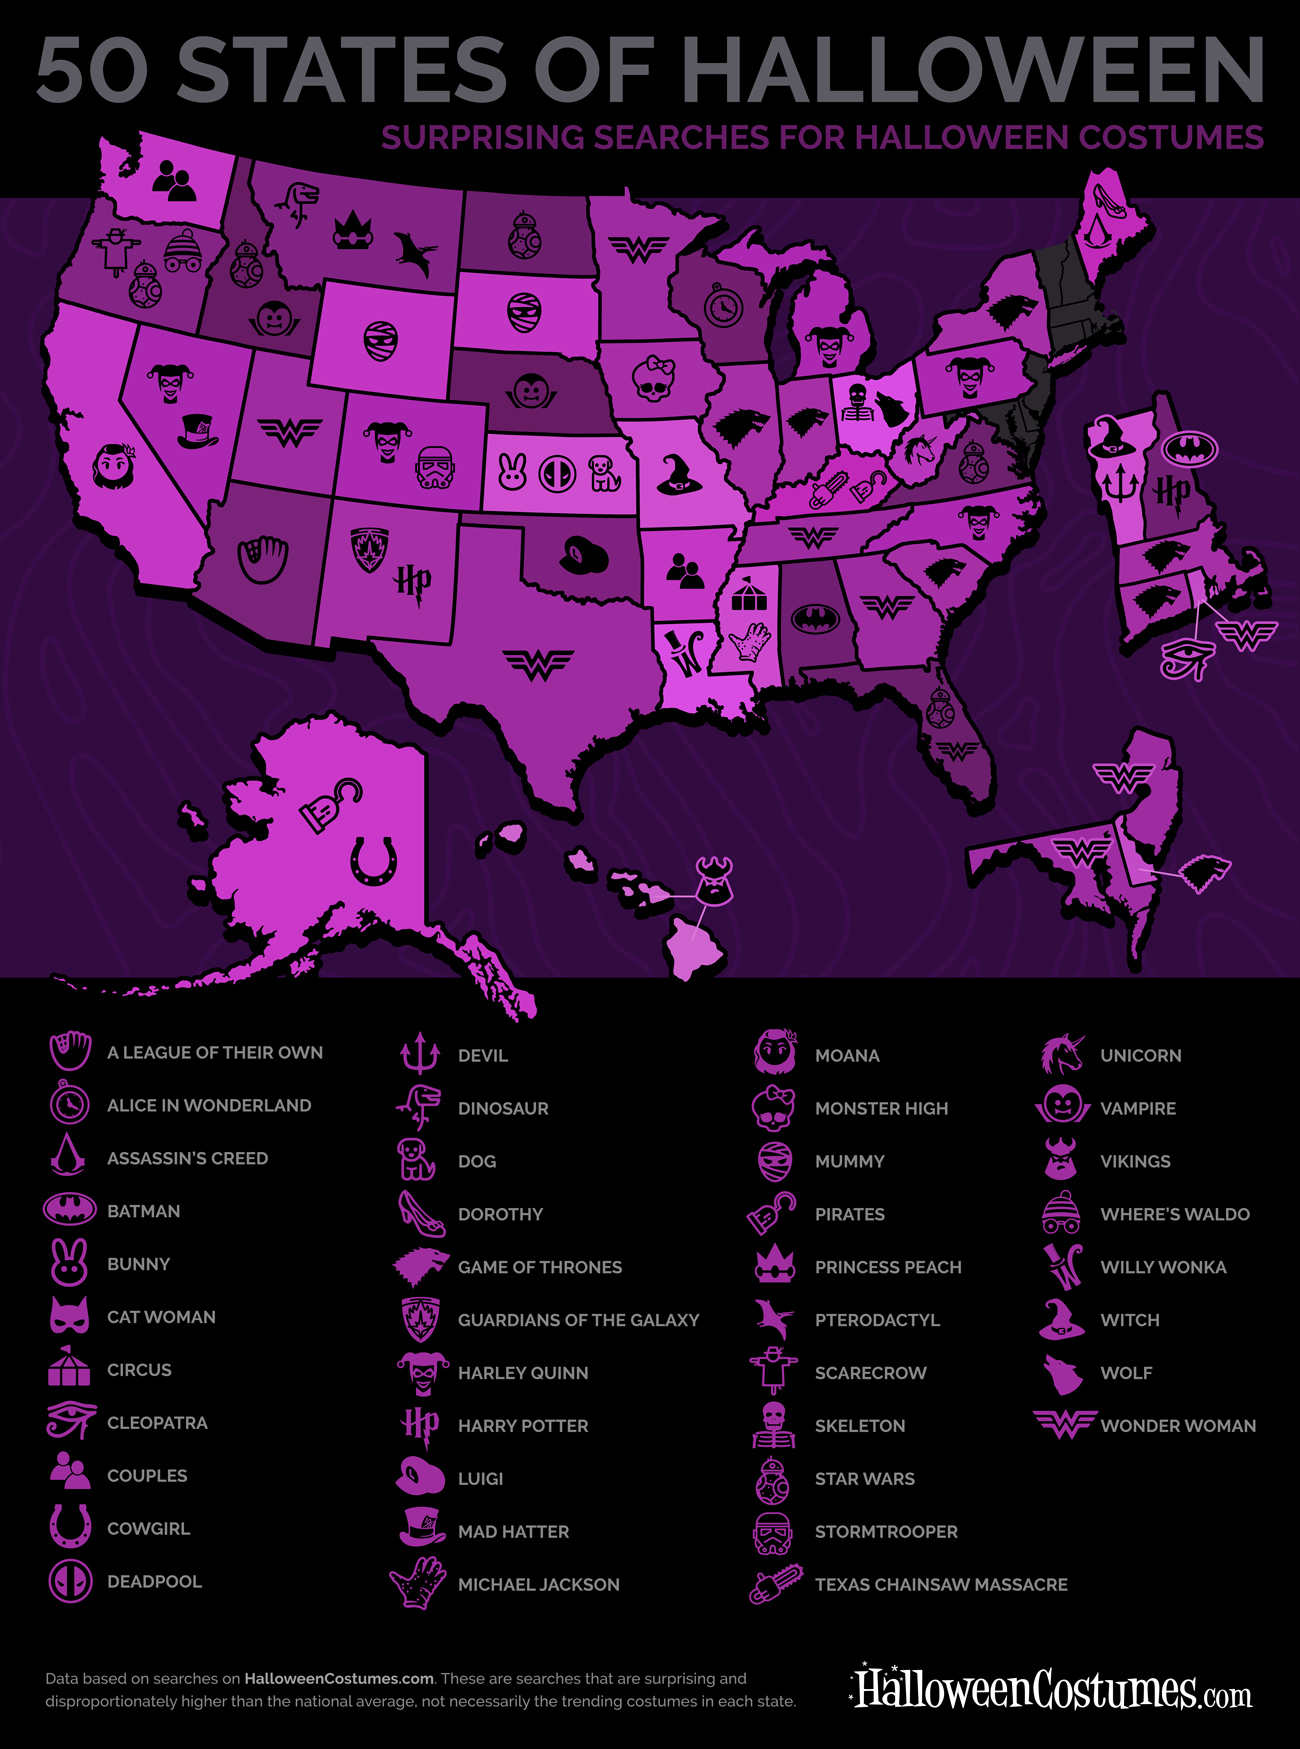 50 States of Halloween: Surprising Searches for Halloween Costumes